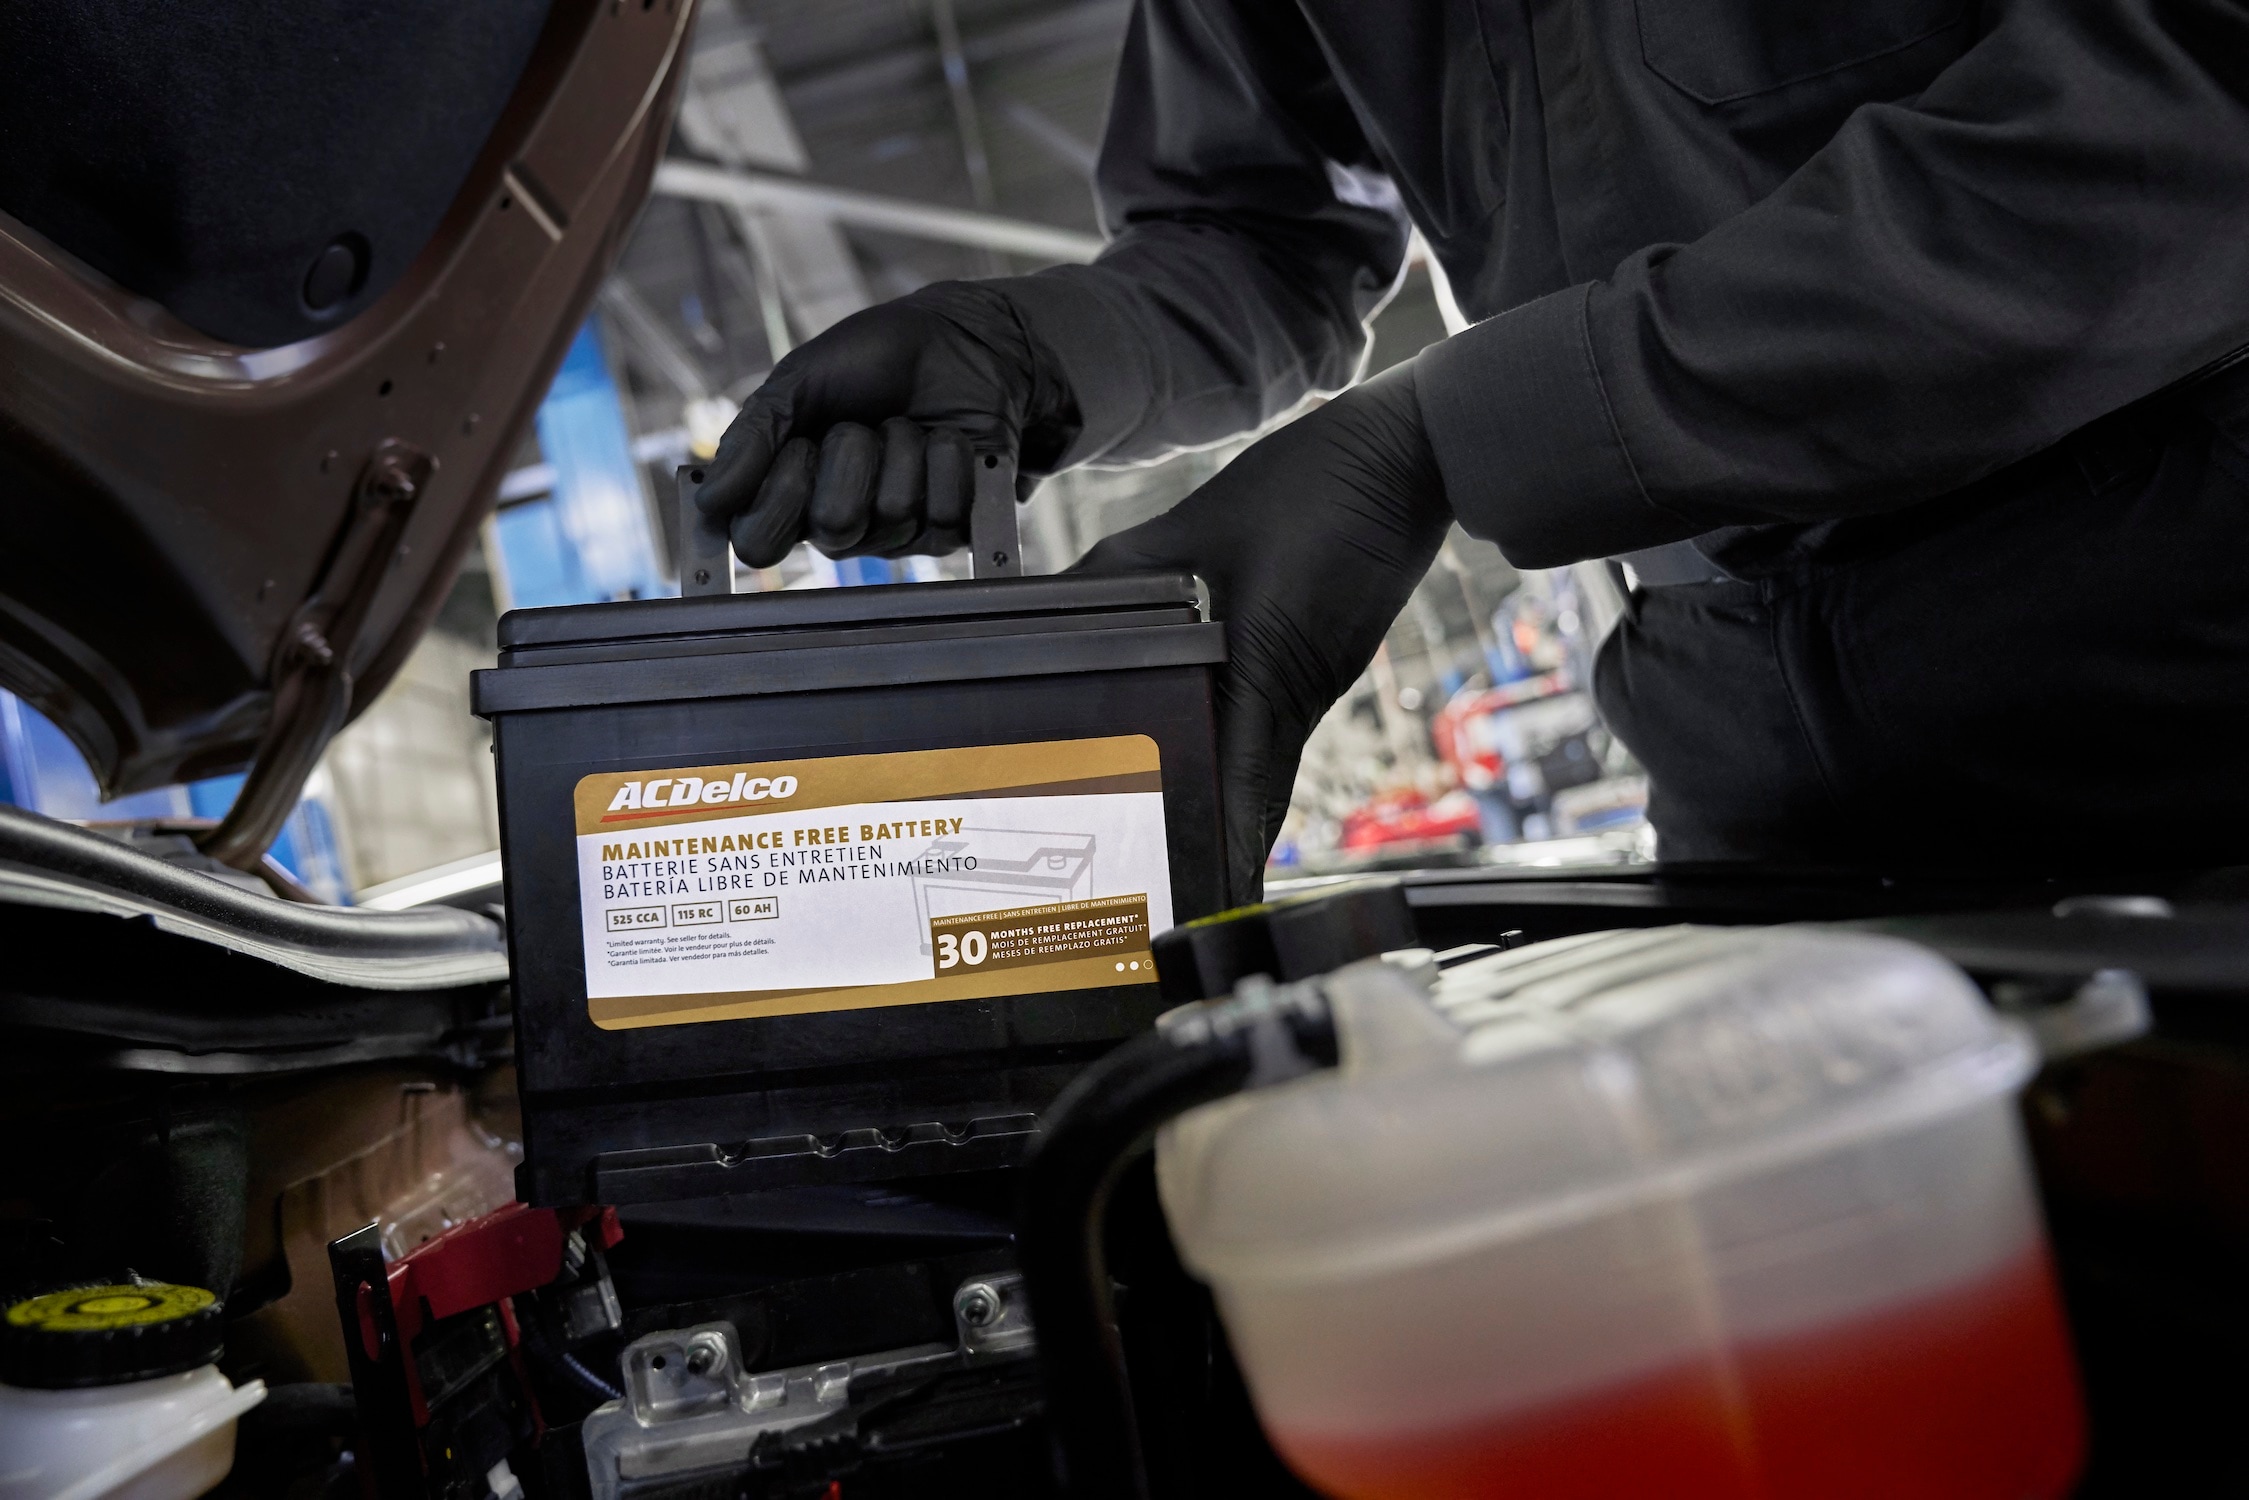 Auto service battery replacement and installation in Santa Fe, NM